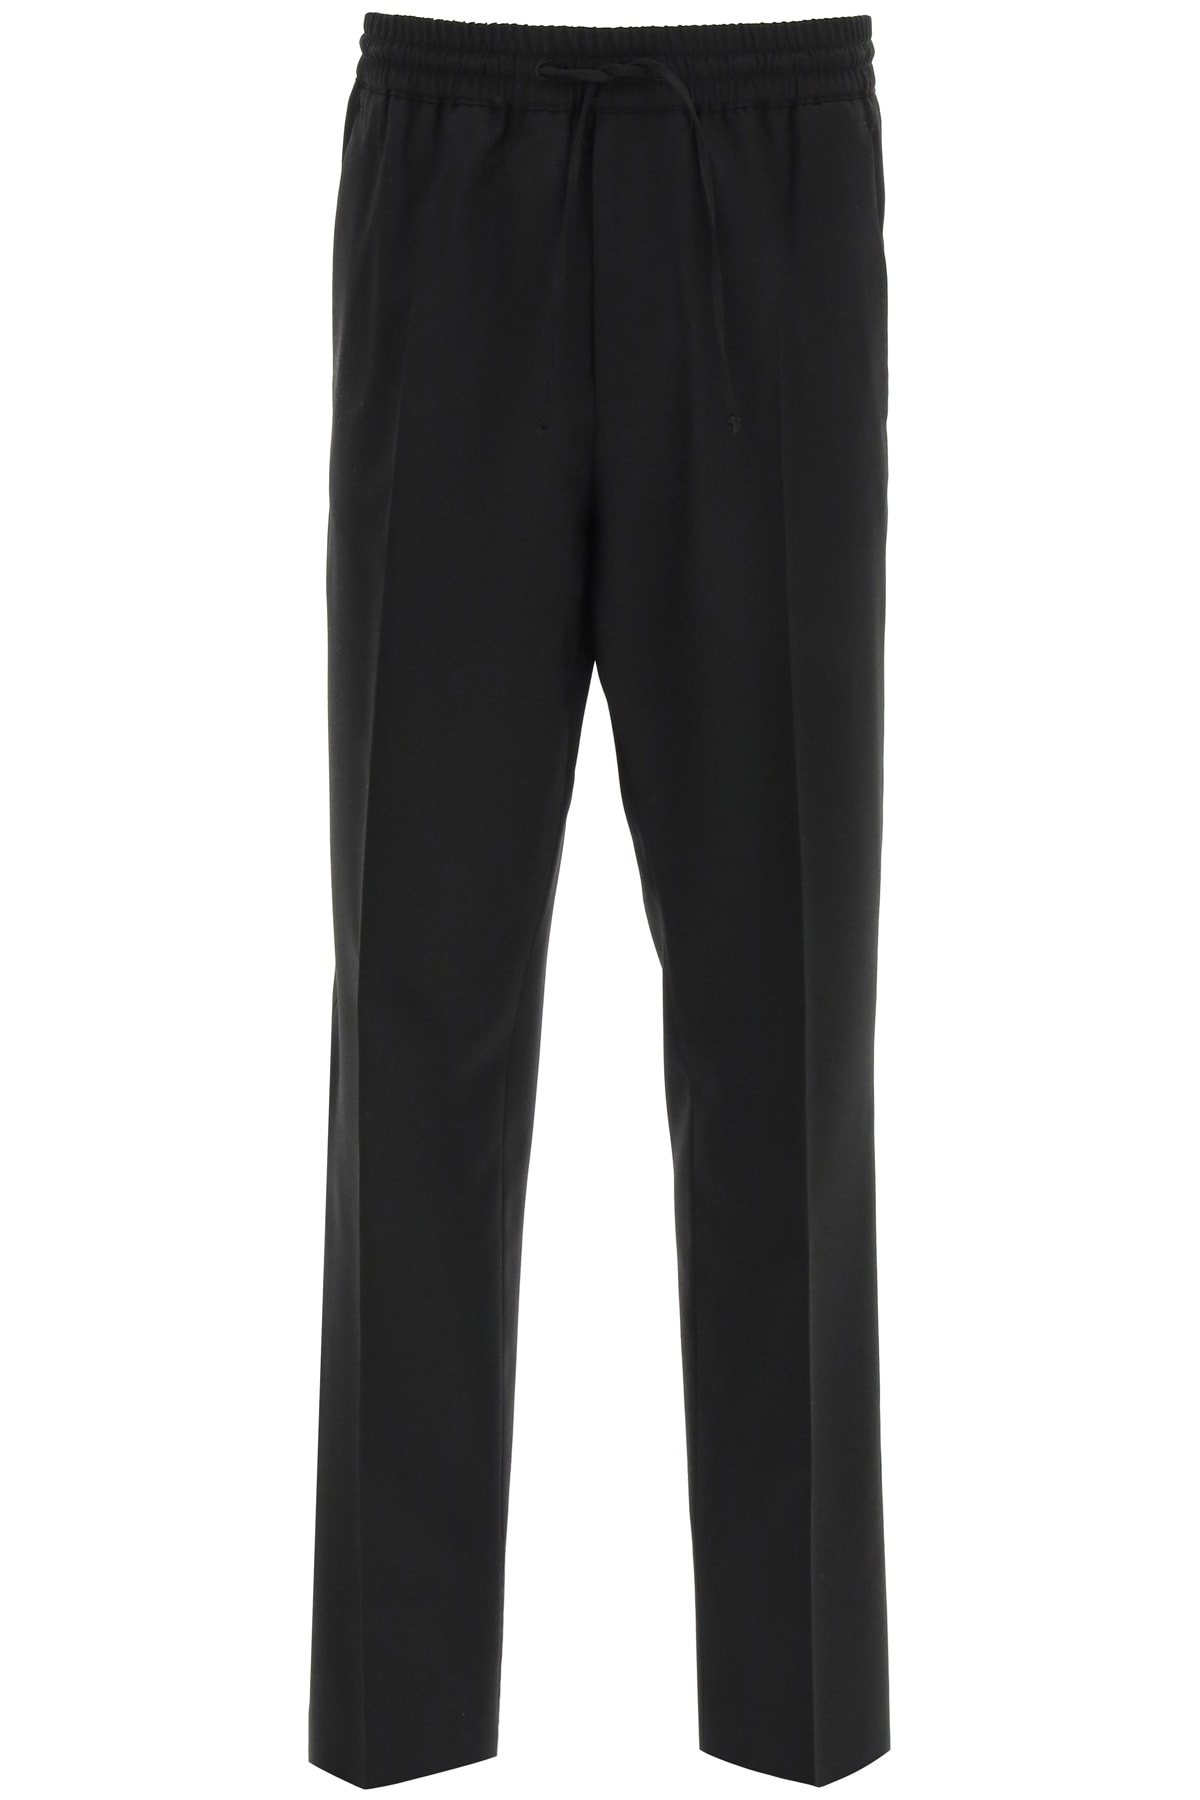 Versace Informal Wool Trousers With Embroidery